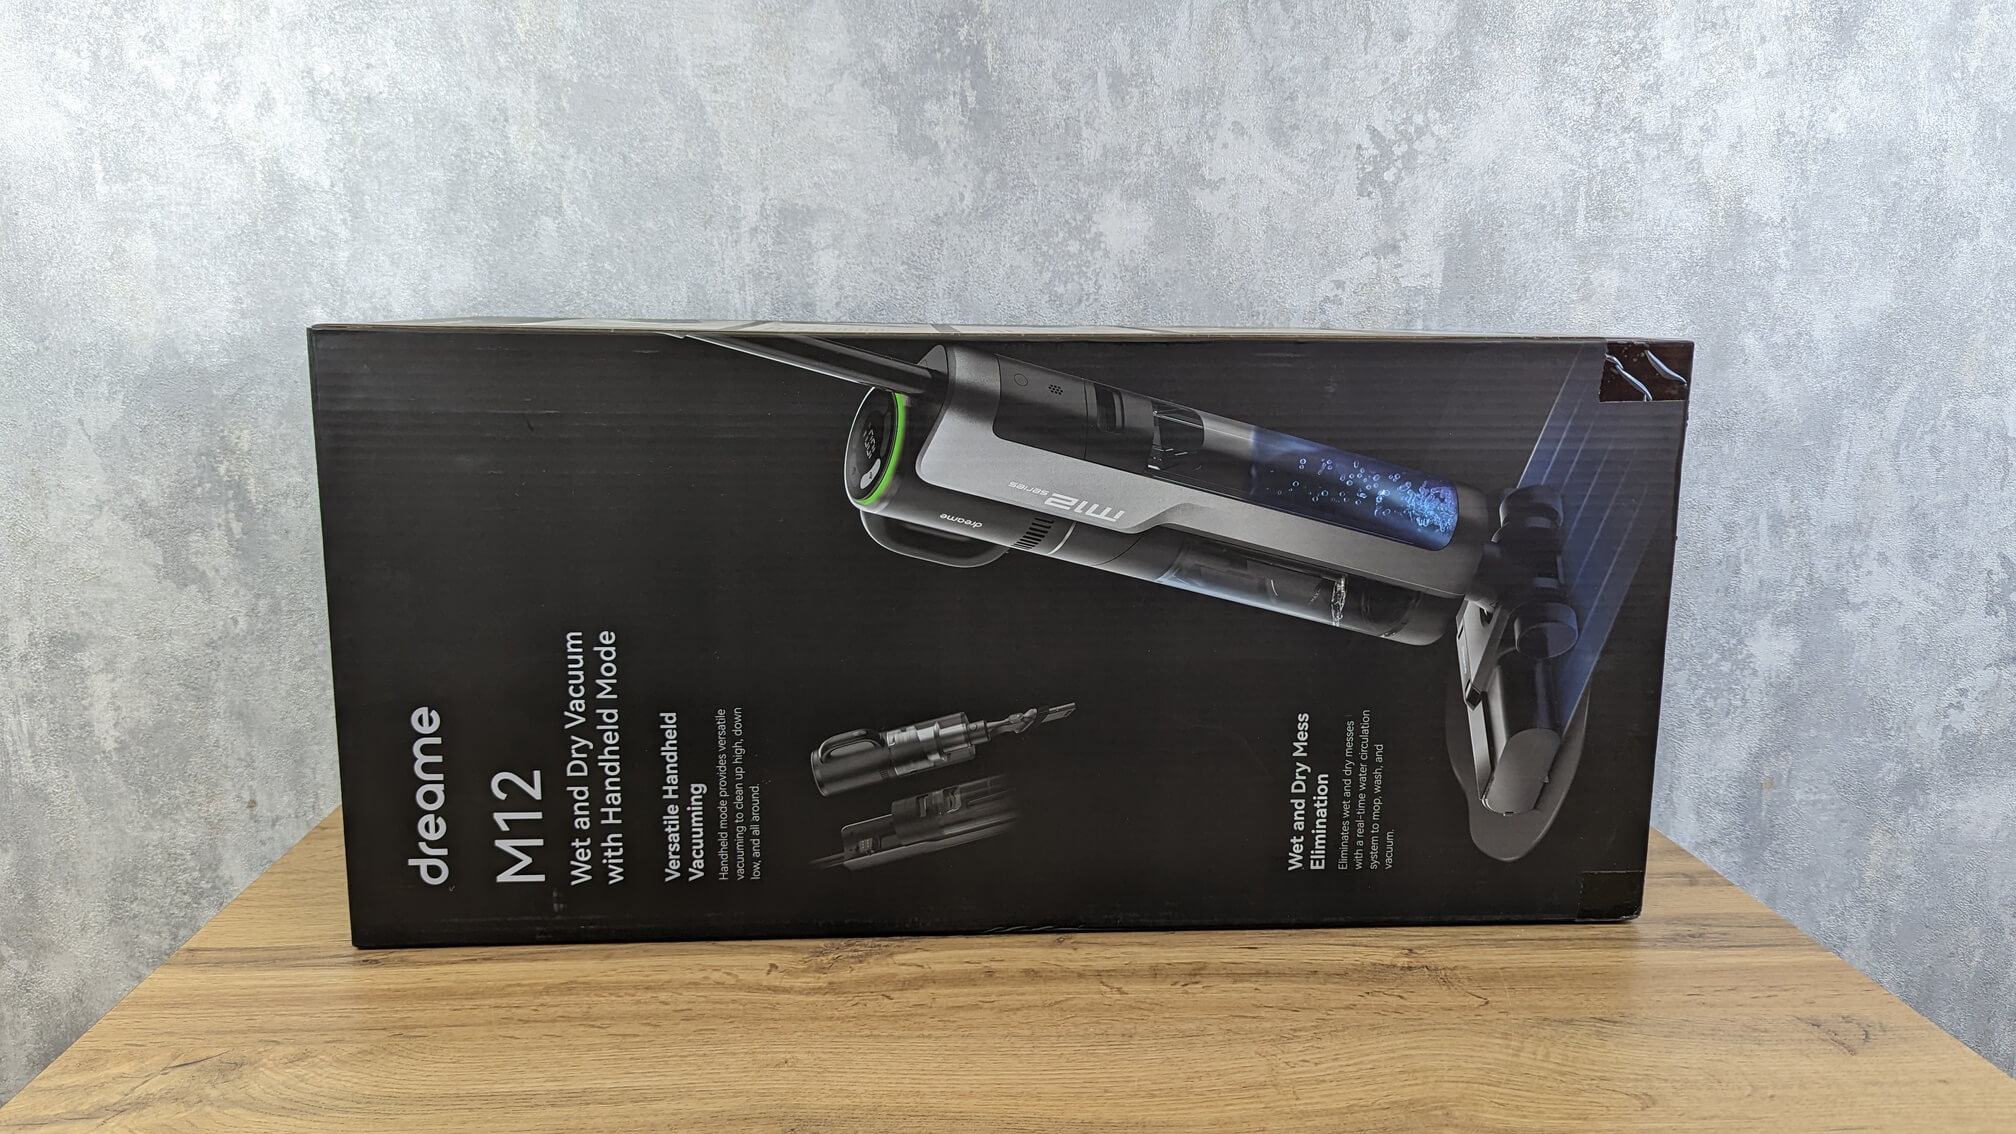 Dreame M12 Review & what this vacuum capable of? is Test